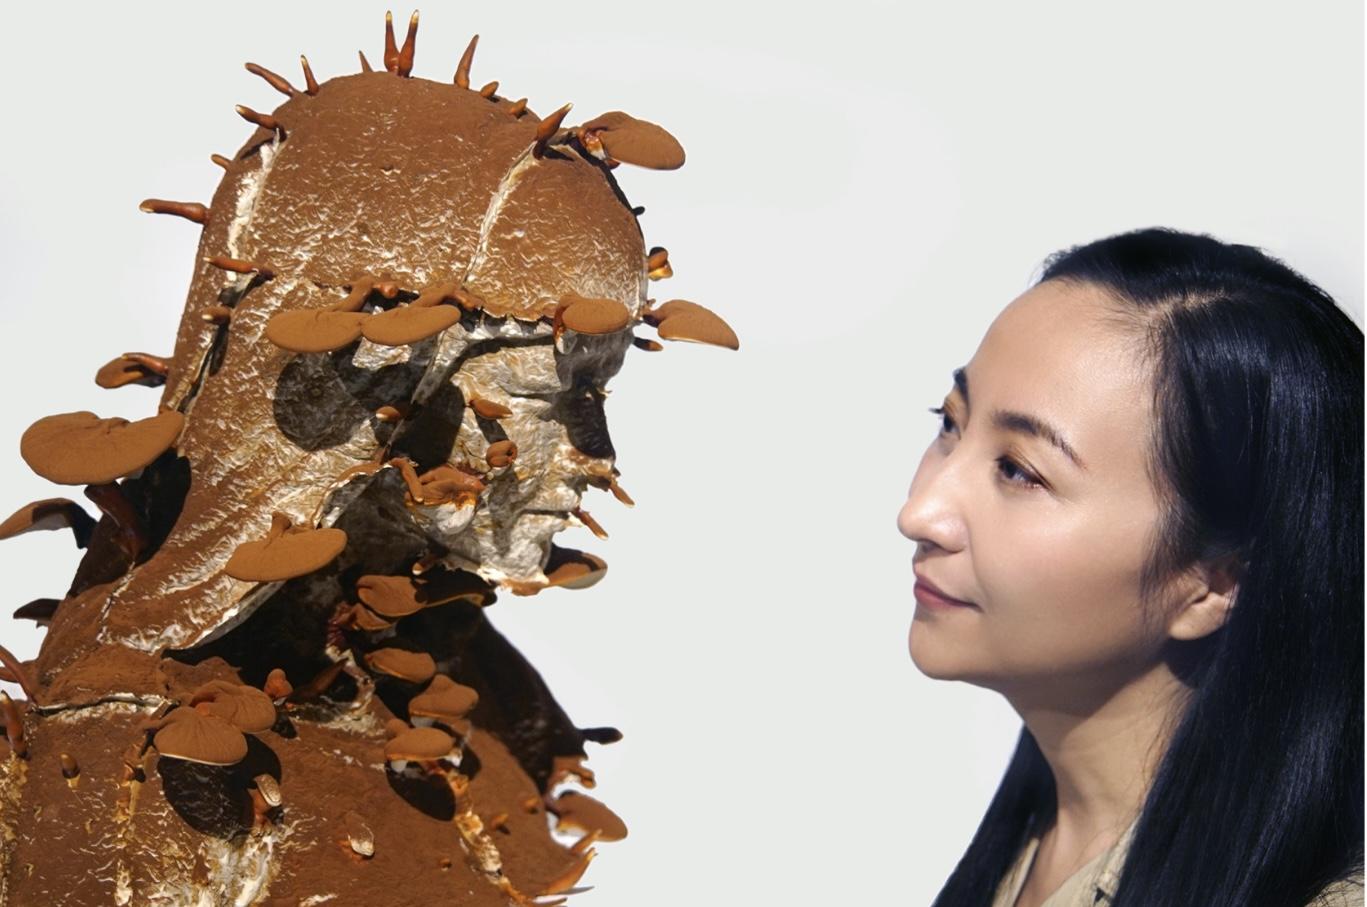 On the left, sculptural work of a figure with various sized circular pieces attached to its head, neck and shoulders. The sculpture is covered in medium-dark reddish brown rust. On the right, a person stands in front of the sculpture, looking into its eyes. 